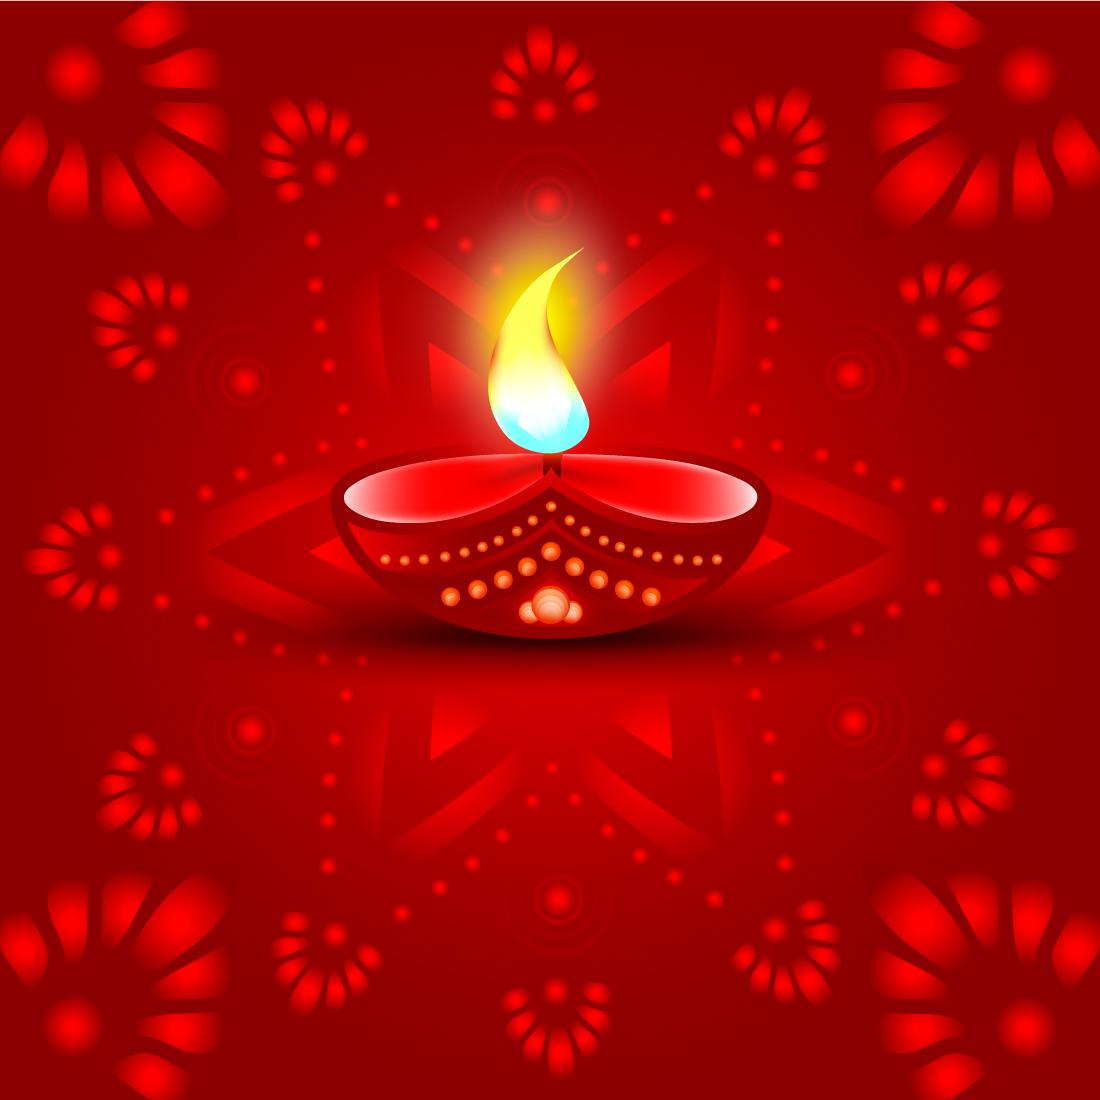 Lit diya on a red background for diwaling.